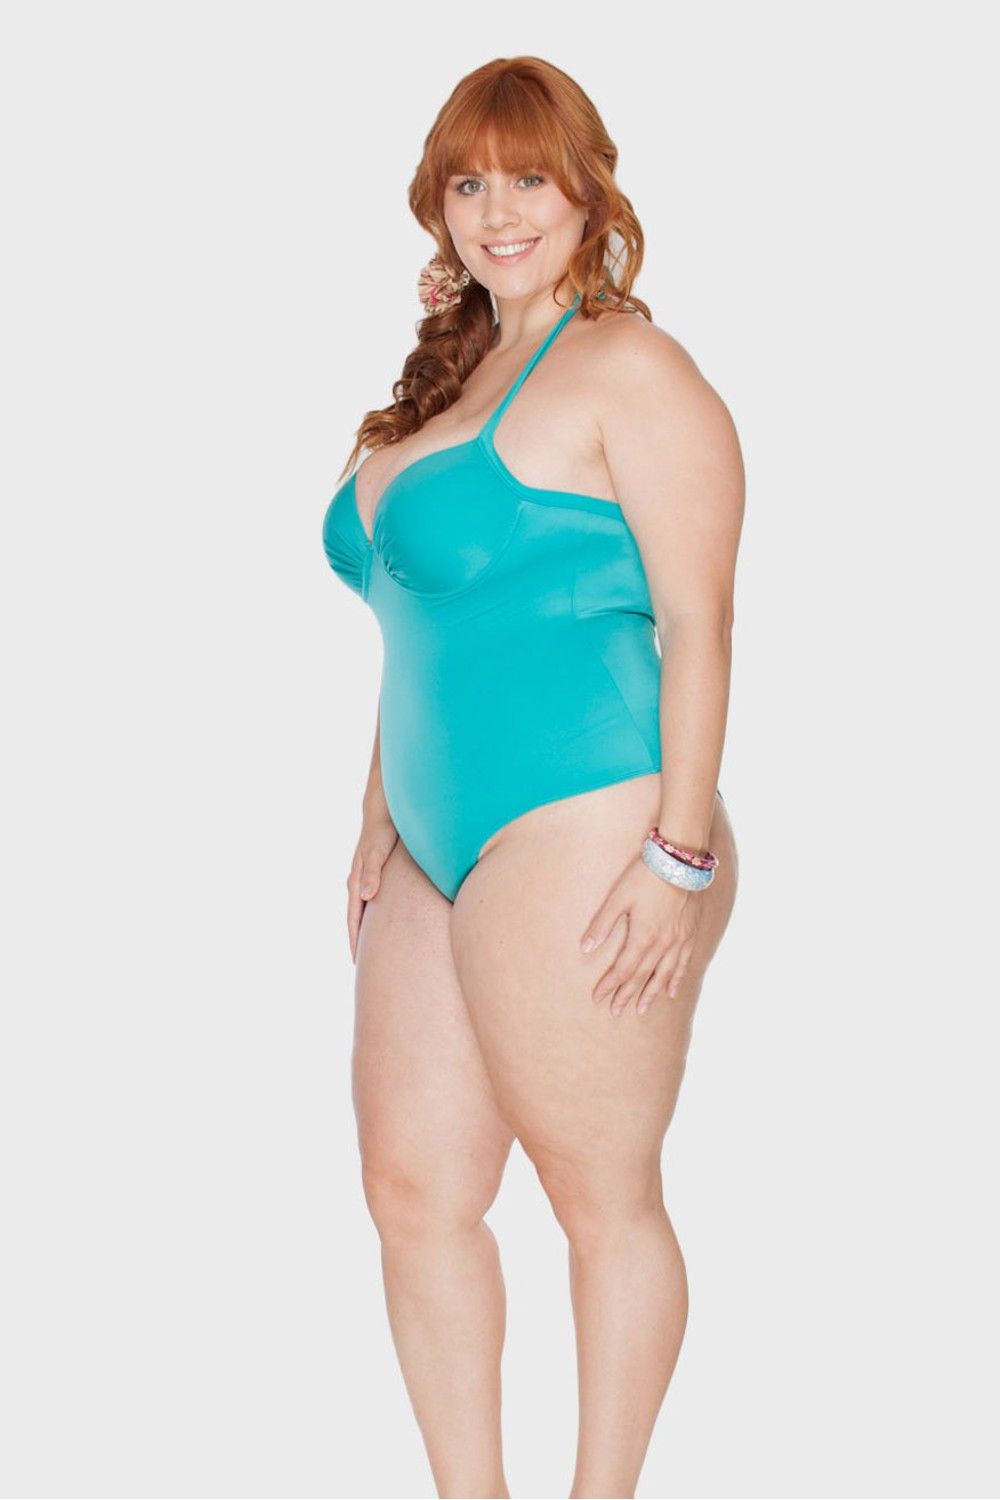 damon hoskins recommends Plus Size Red Head